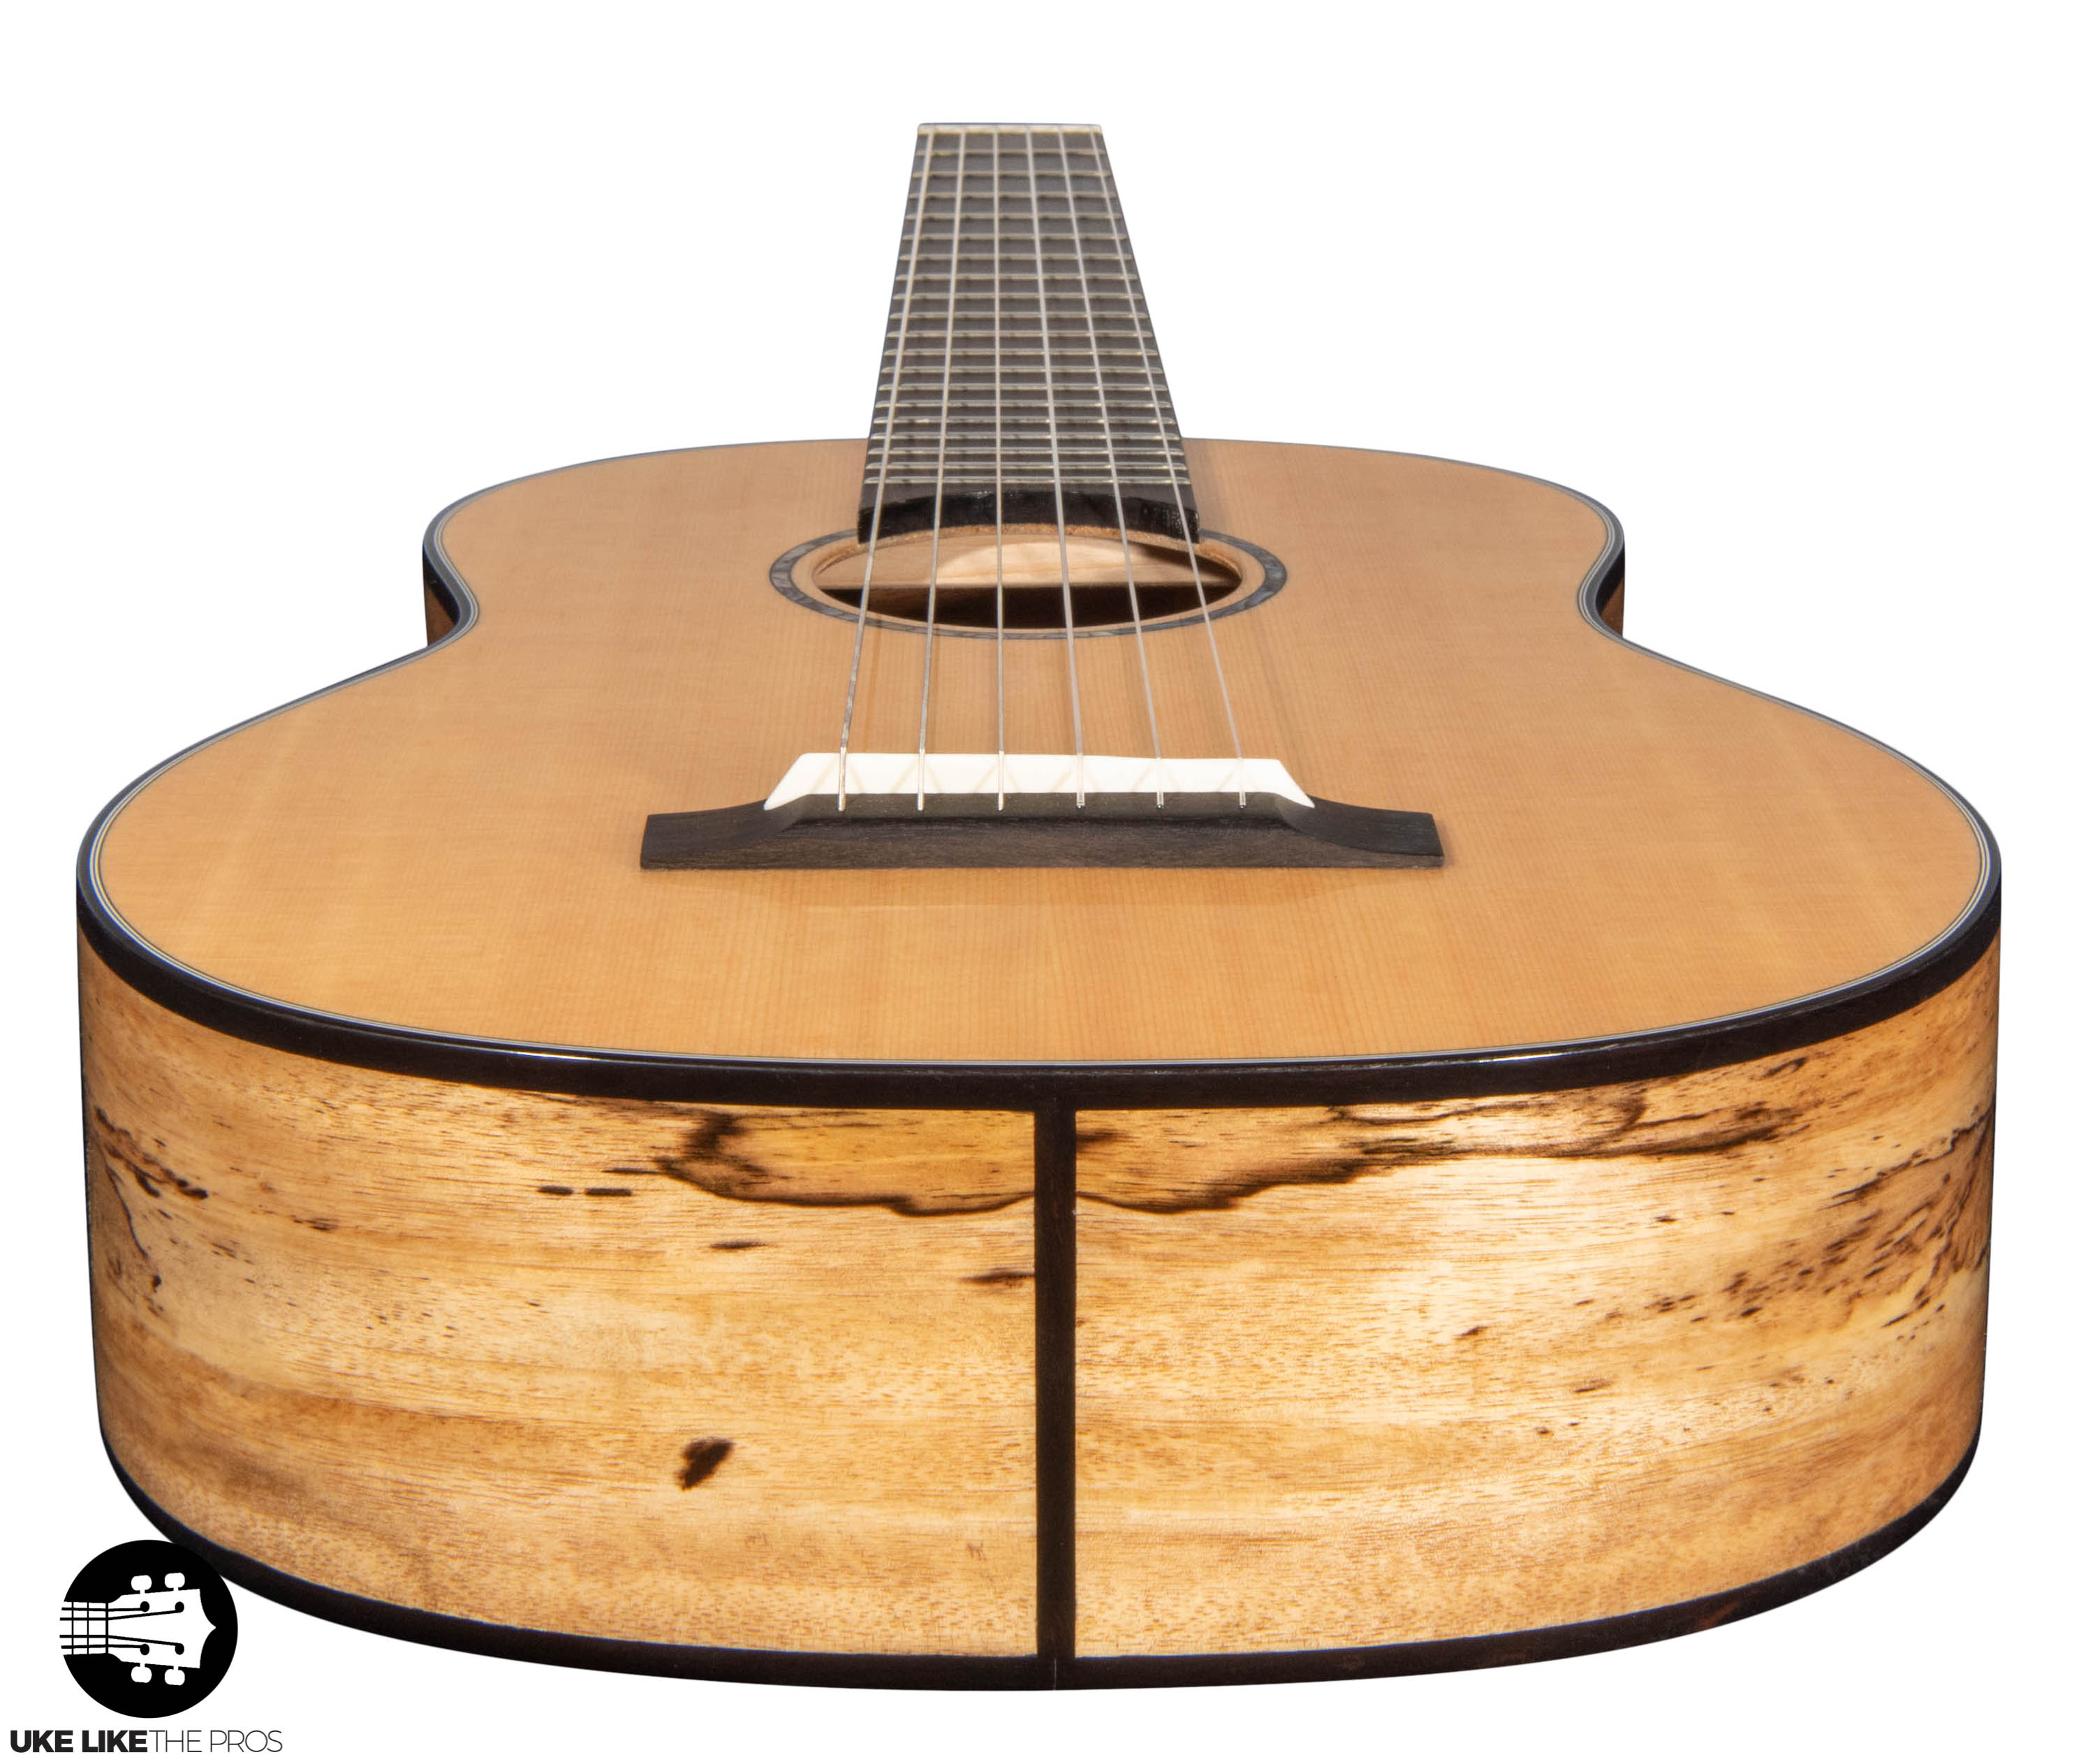 Romero Creations RC-PG-SMG Parlor Guitar Spruce and Spalted Mango "Miraz" Tuned E to E